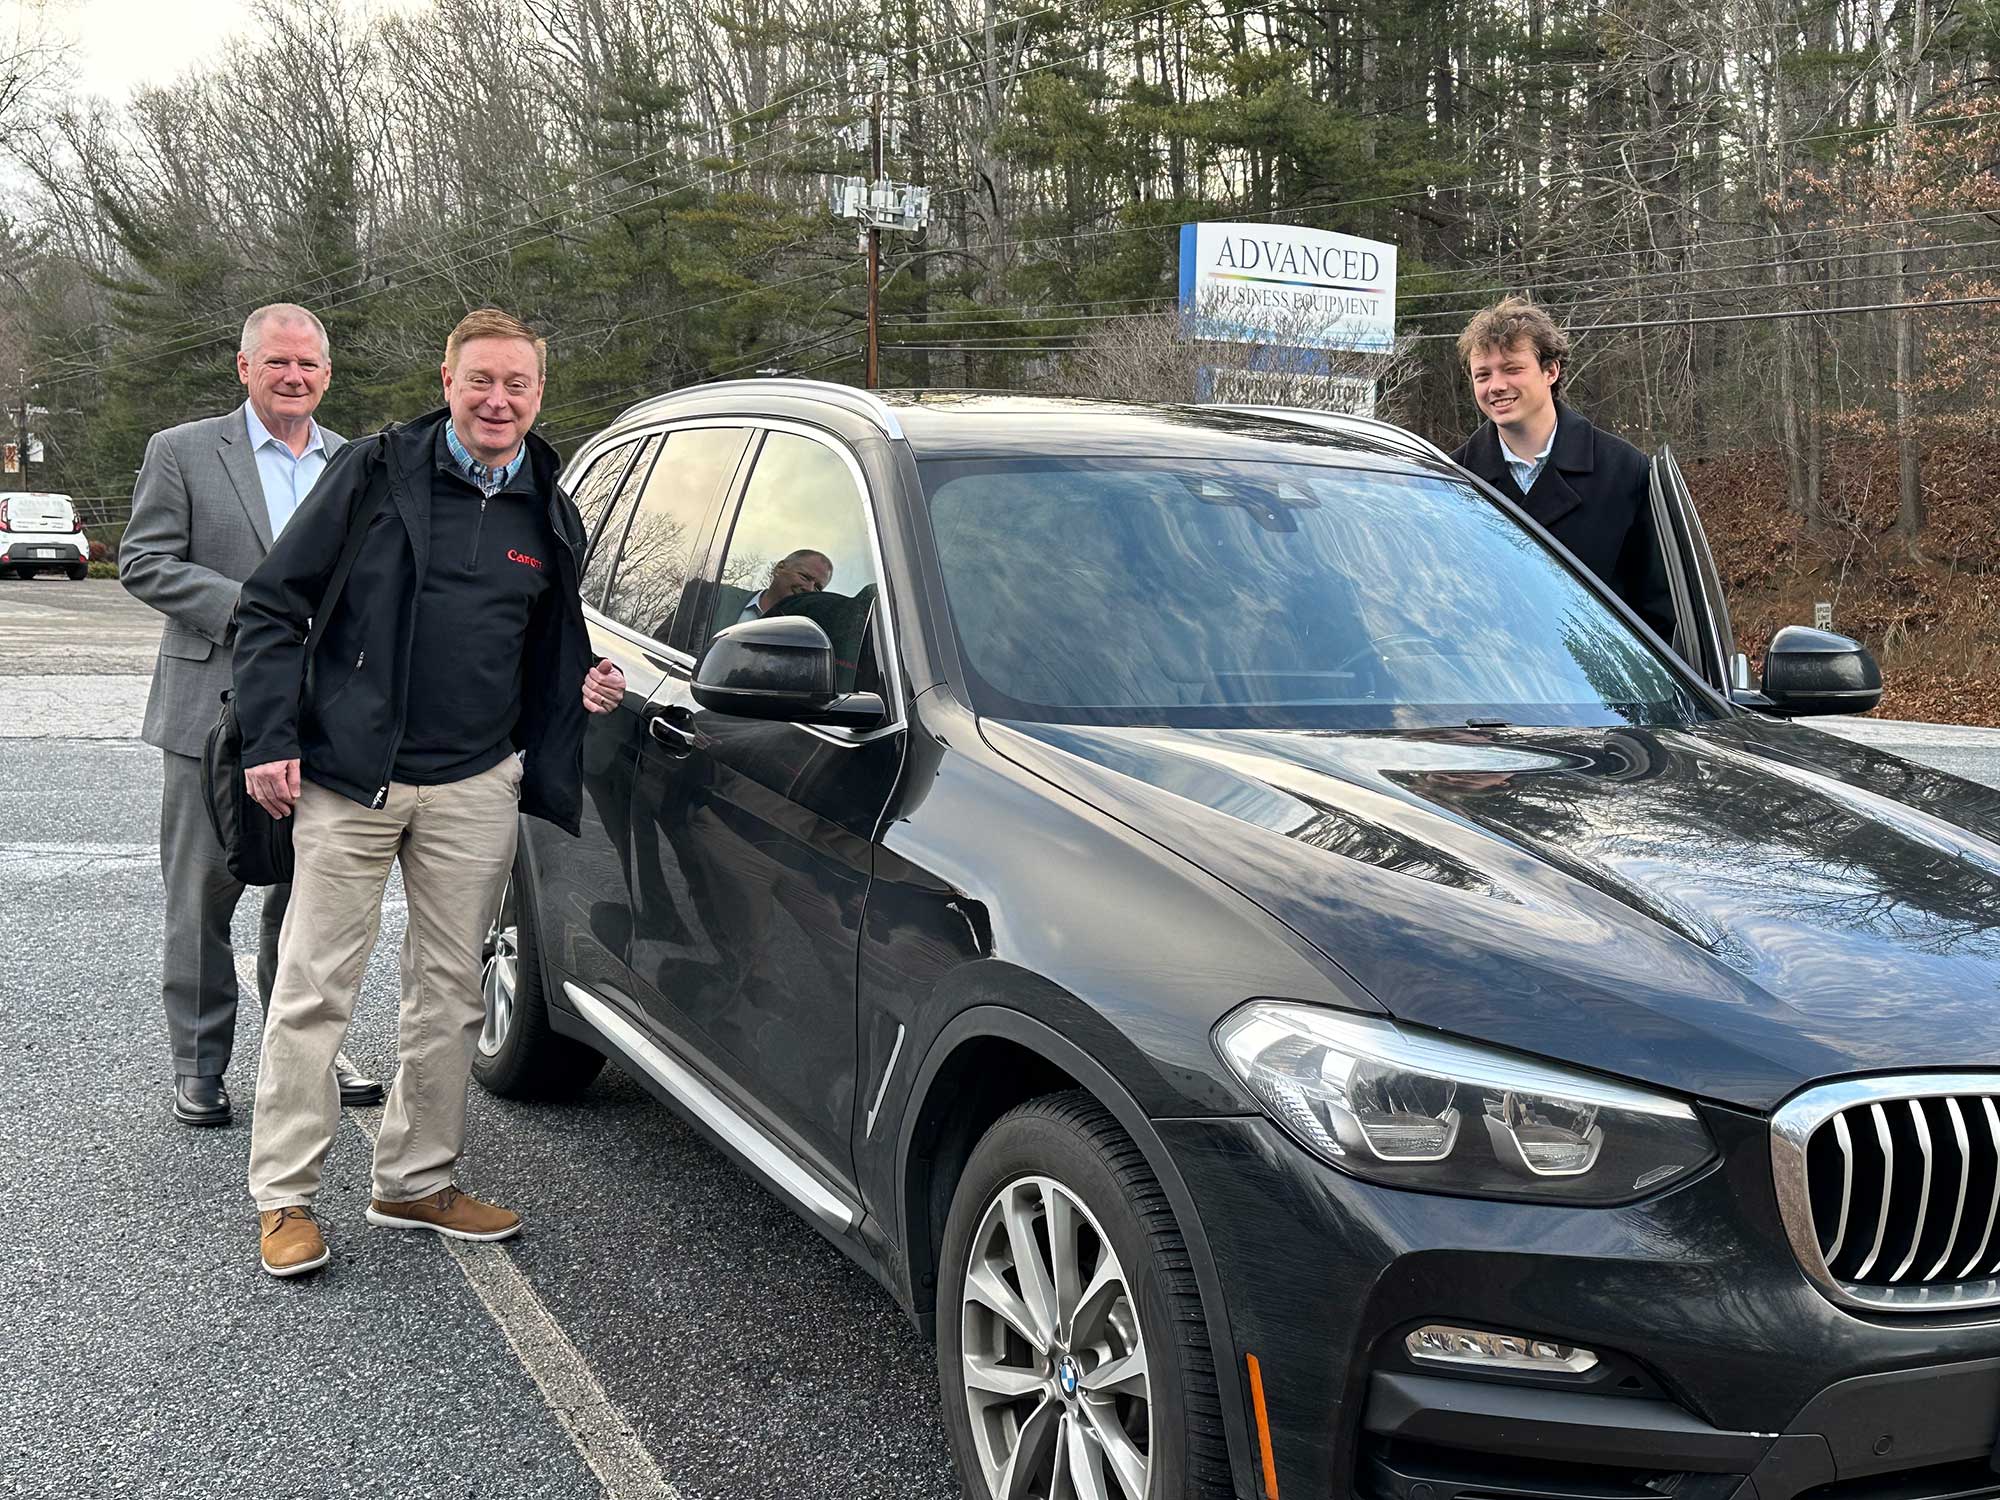 On the move with, from left, ABE sales manager Baxter Culler, Canon's Dusty Morrow, and ABE account rep. Cade Ramsey, ready to share the game-changing perks of the Canon Colorado Series.